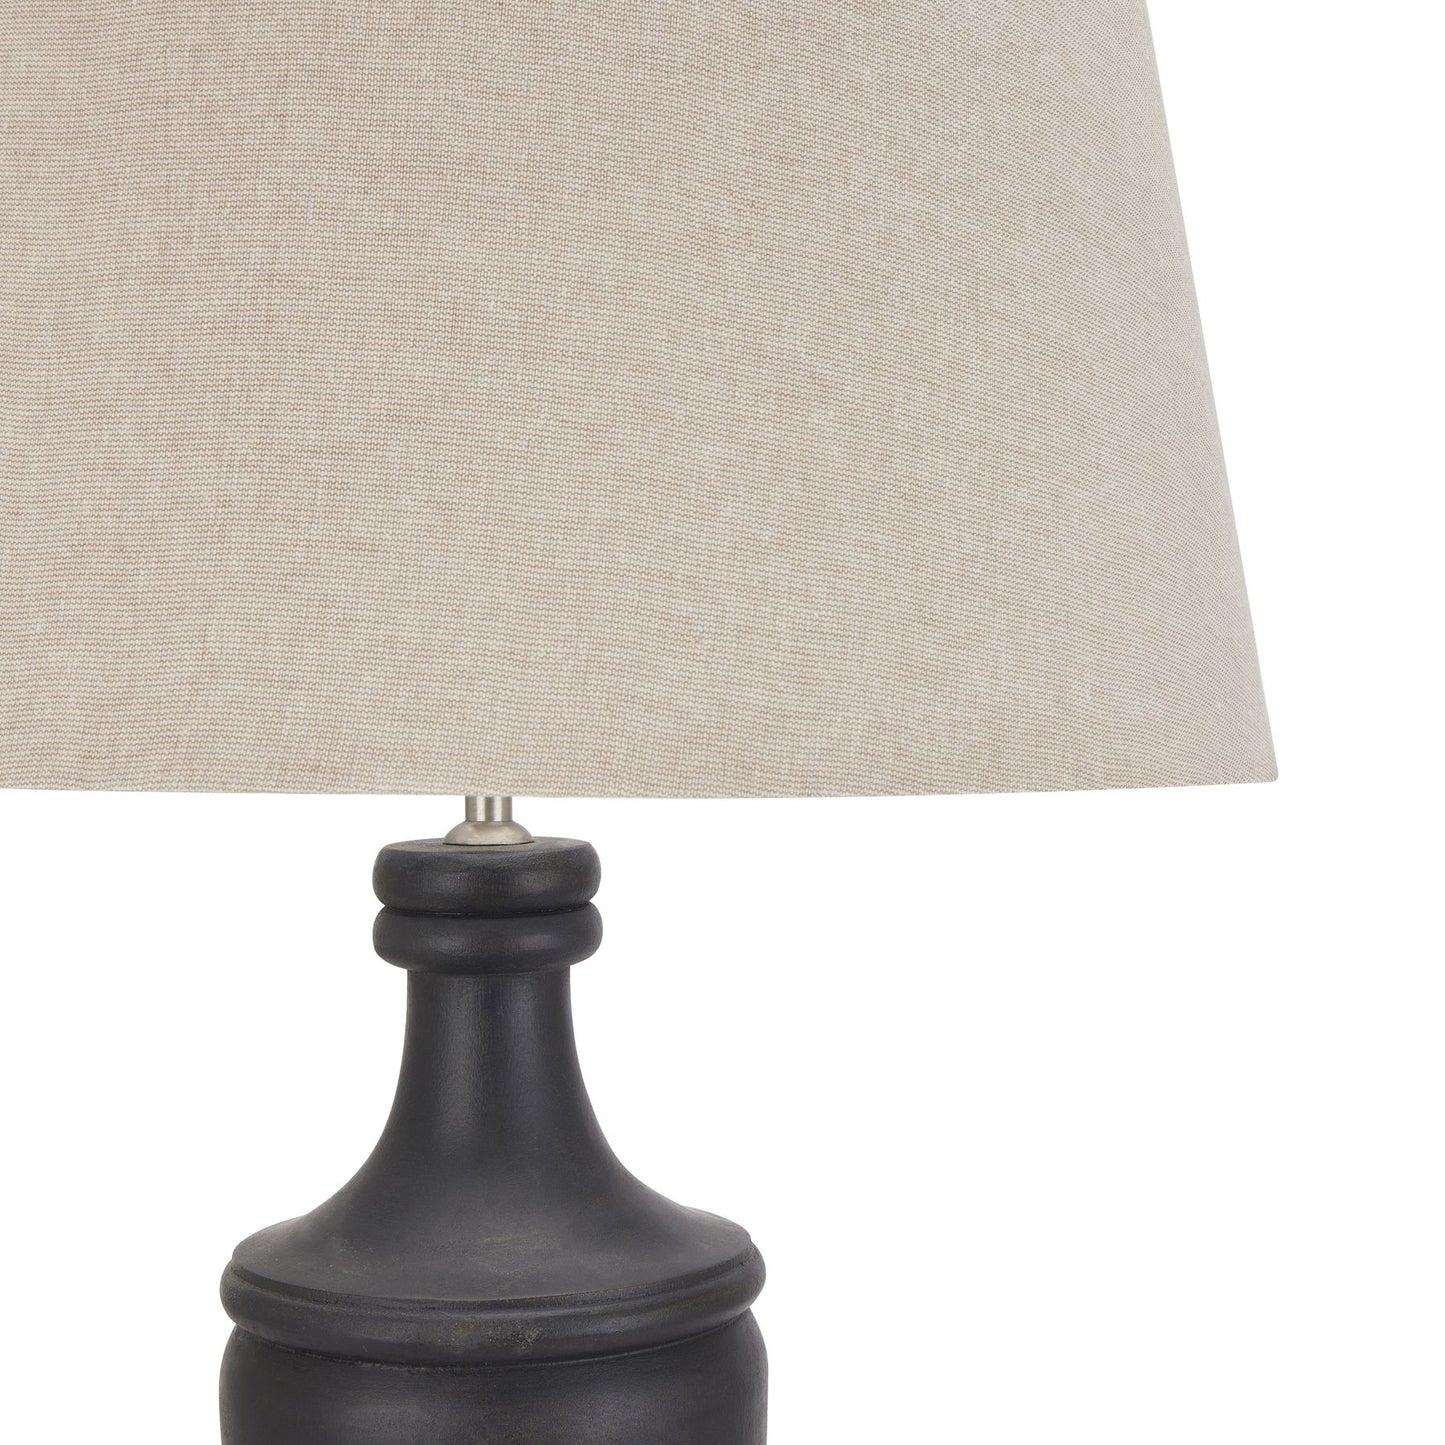 Carberry Dark Grey Stanchion Lamp